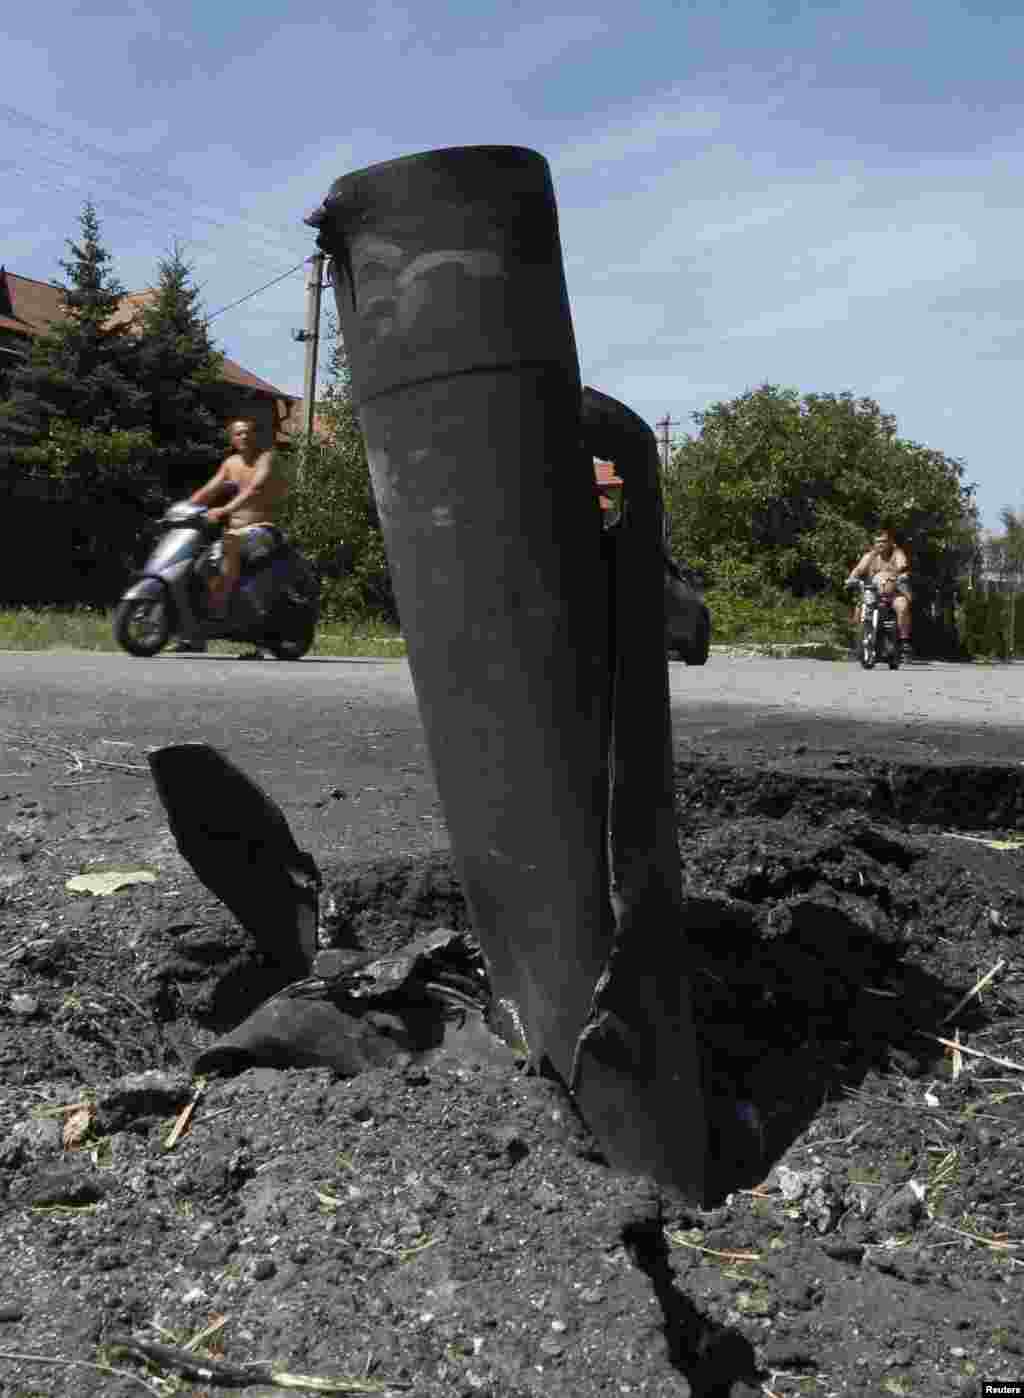 People ride motorcycles past spent ammunition, in the suburbs of Donetsk, July 29, 2014.